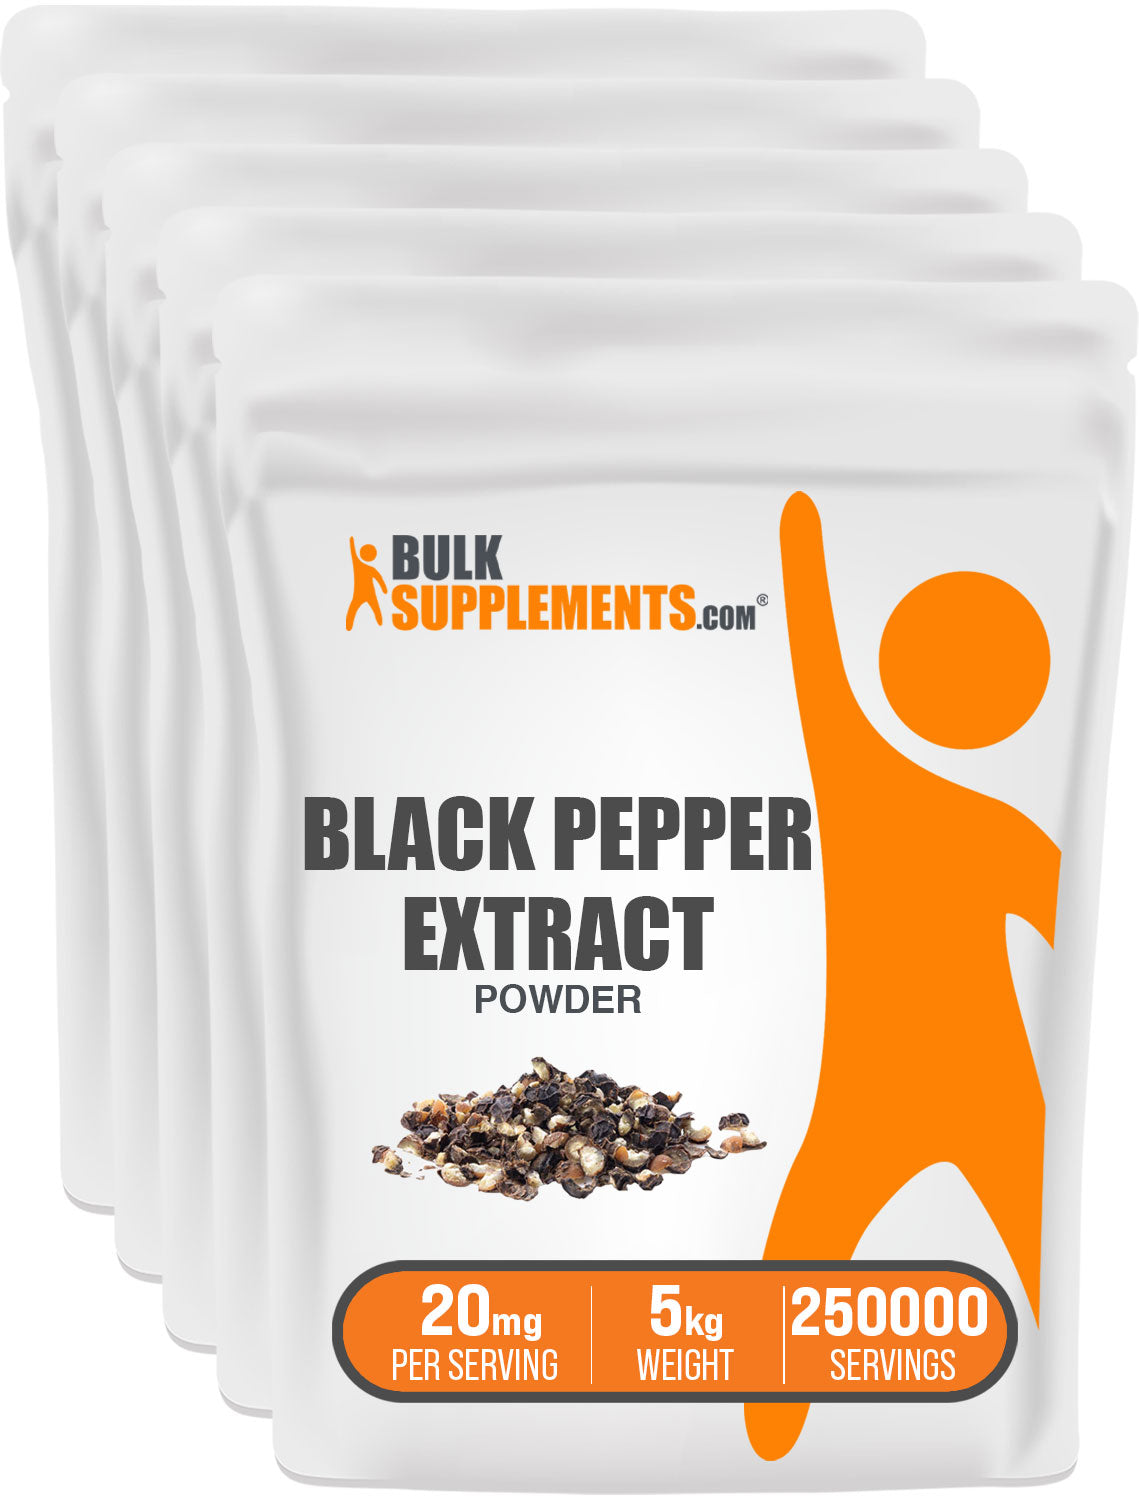 5kg bag of black pepper extract